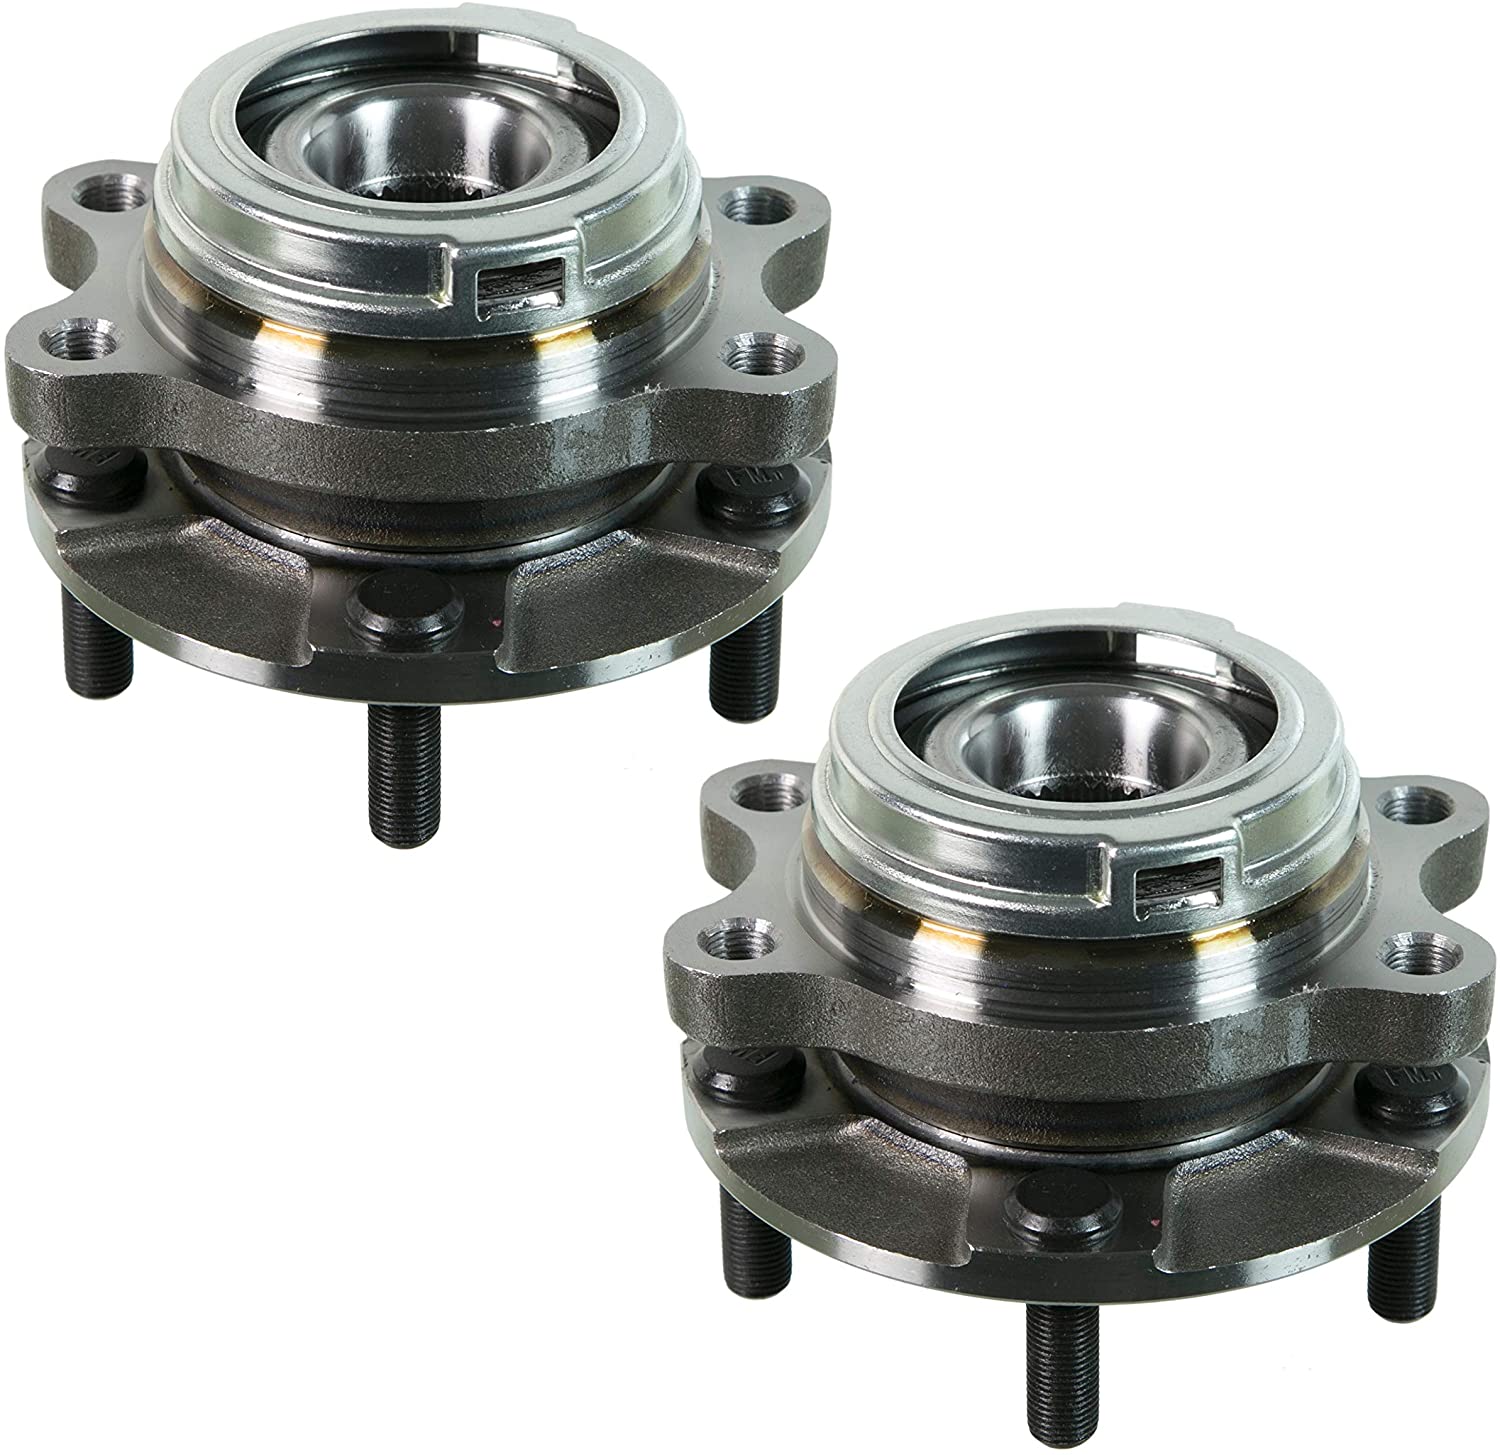 Pair Set of 2 Front Wheel Bearing Hub Assies Kit for Nissan Murano Quest